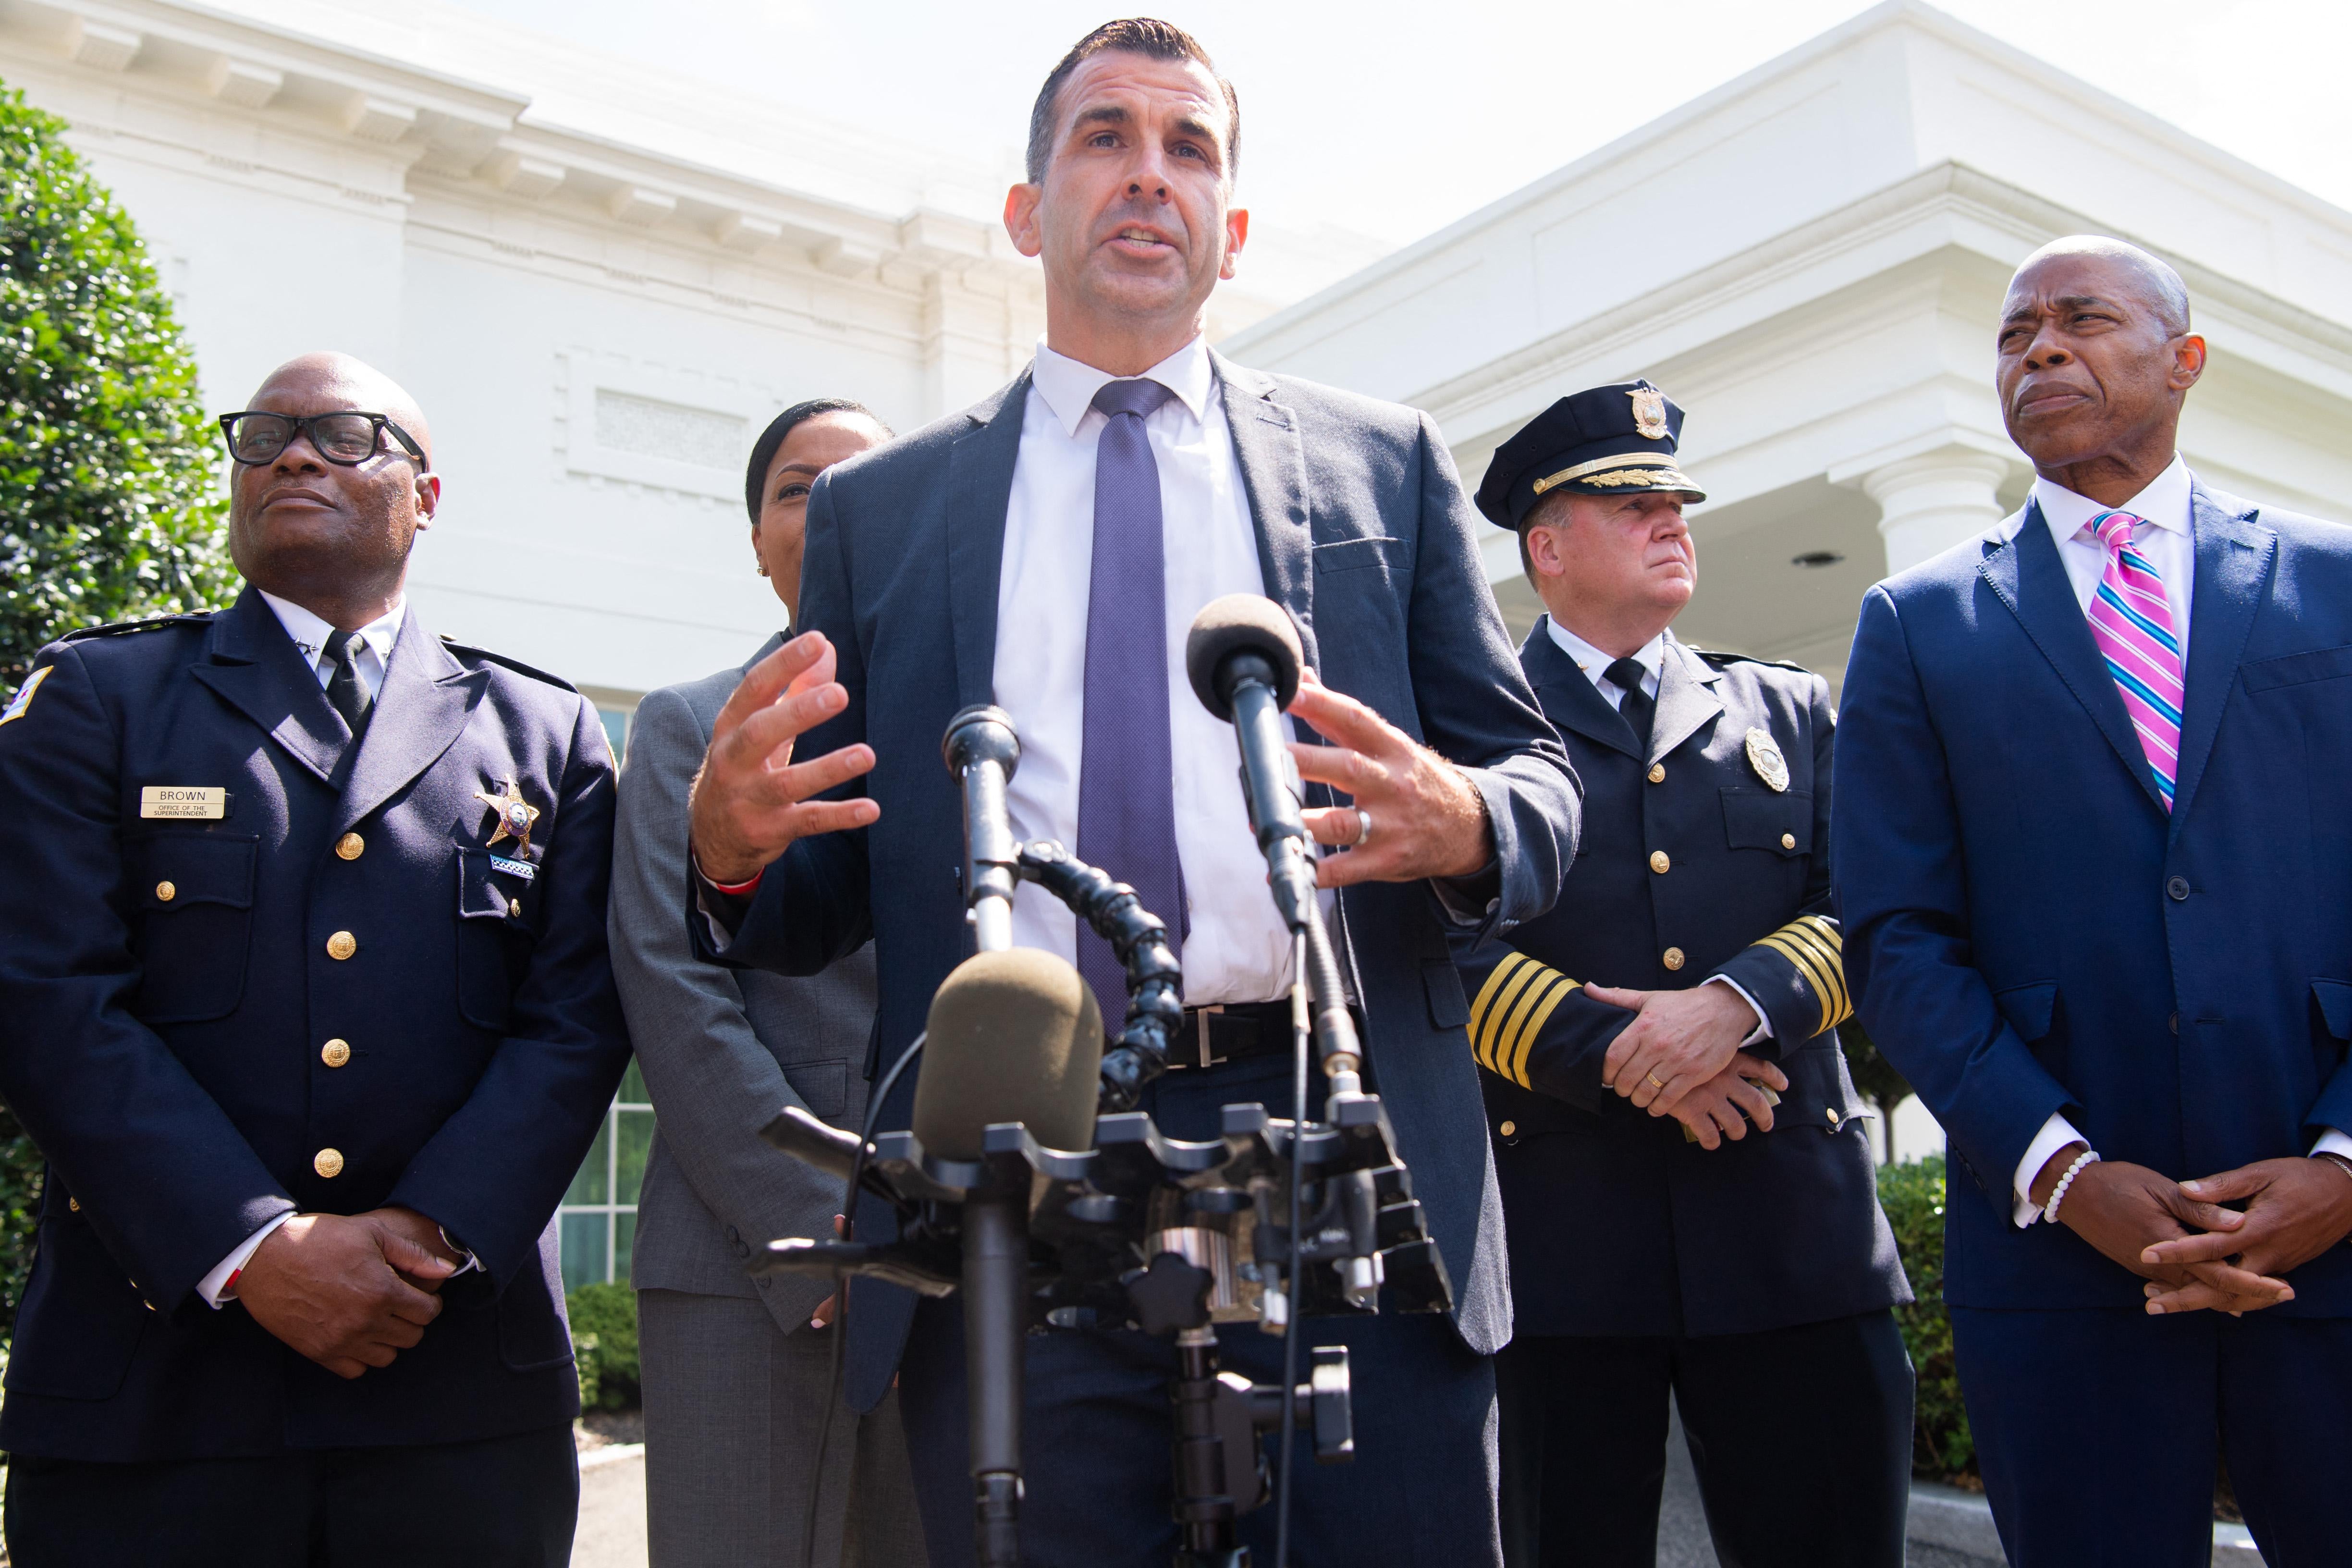 Liccardo stands speaking at a mic with Adams and law enforcement officials around him outside the West Wing of the White House